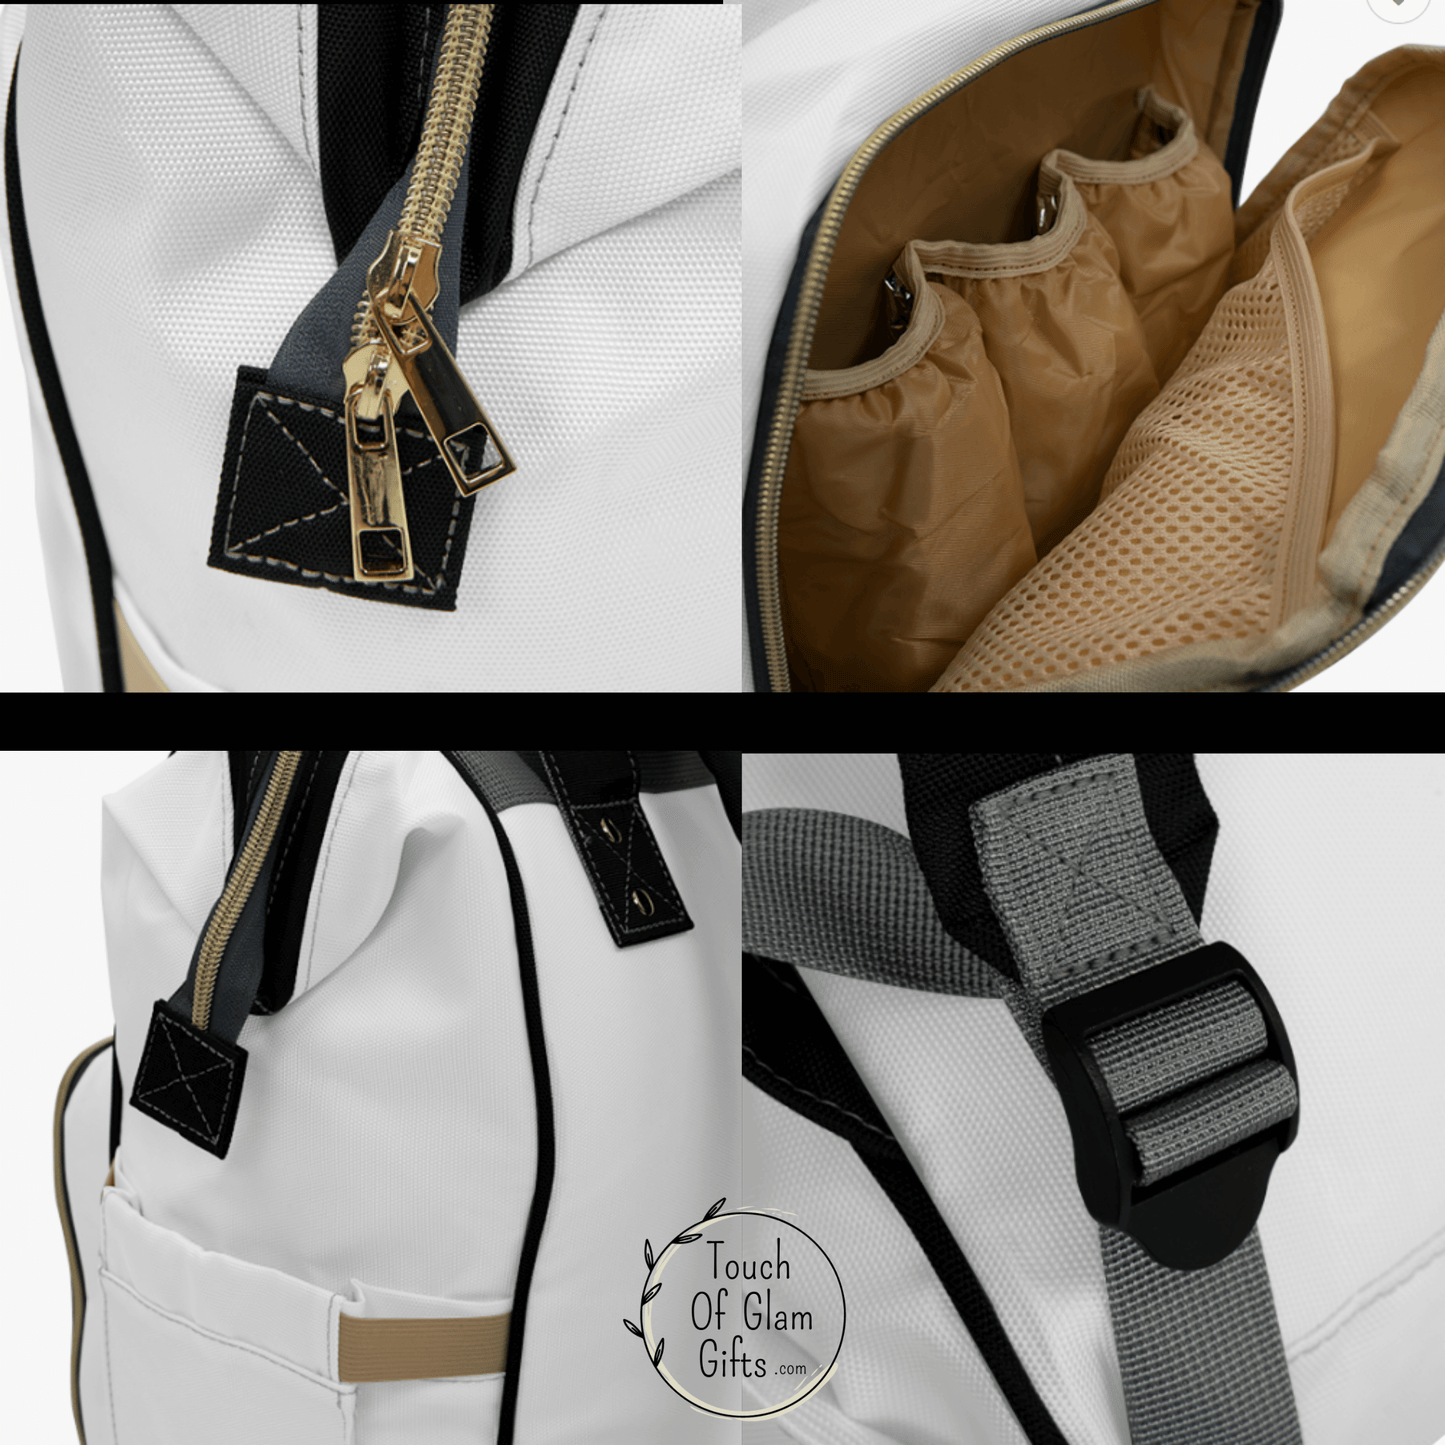 Close up view of inside outer pocket with bottle storage pockets and the grey adjustable straps and gold zippers.